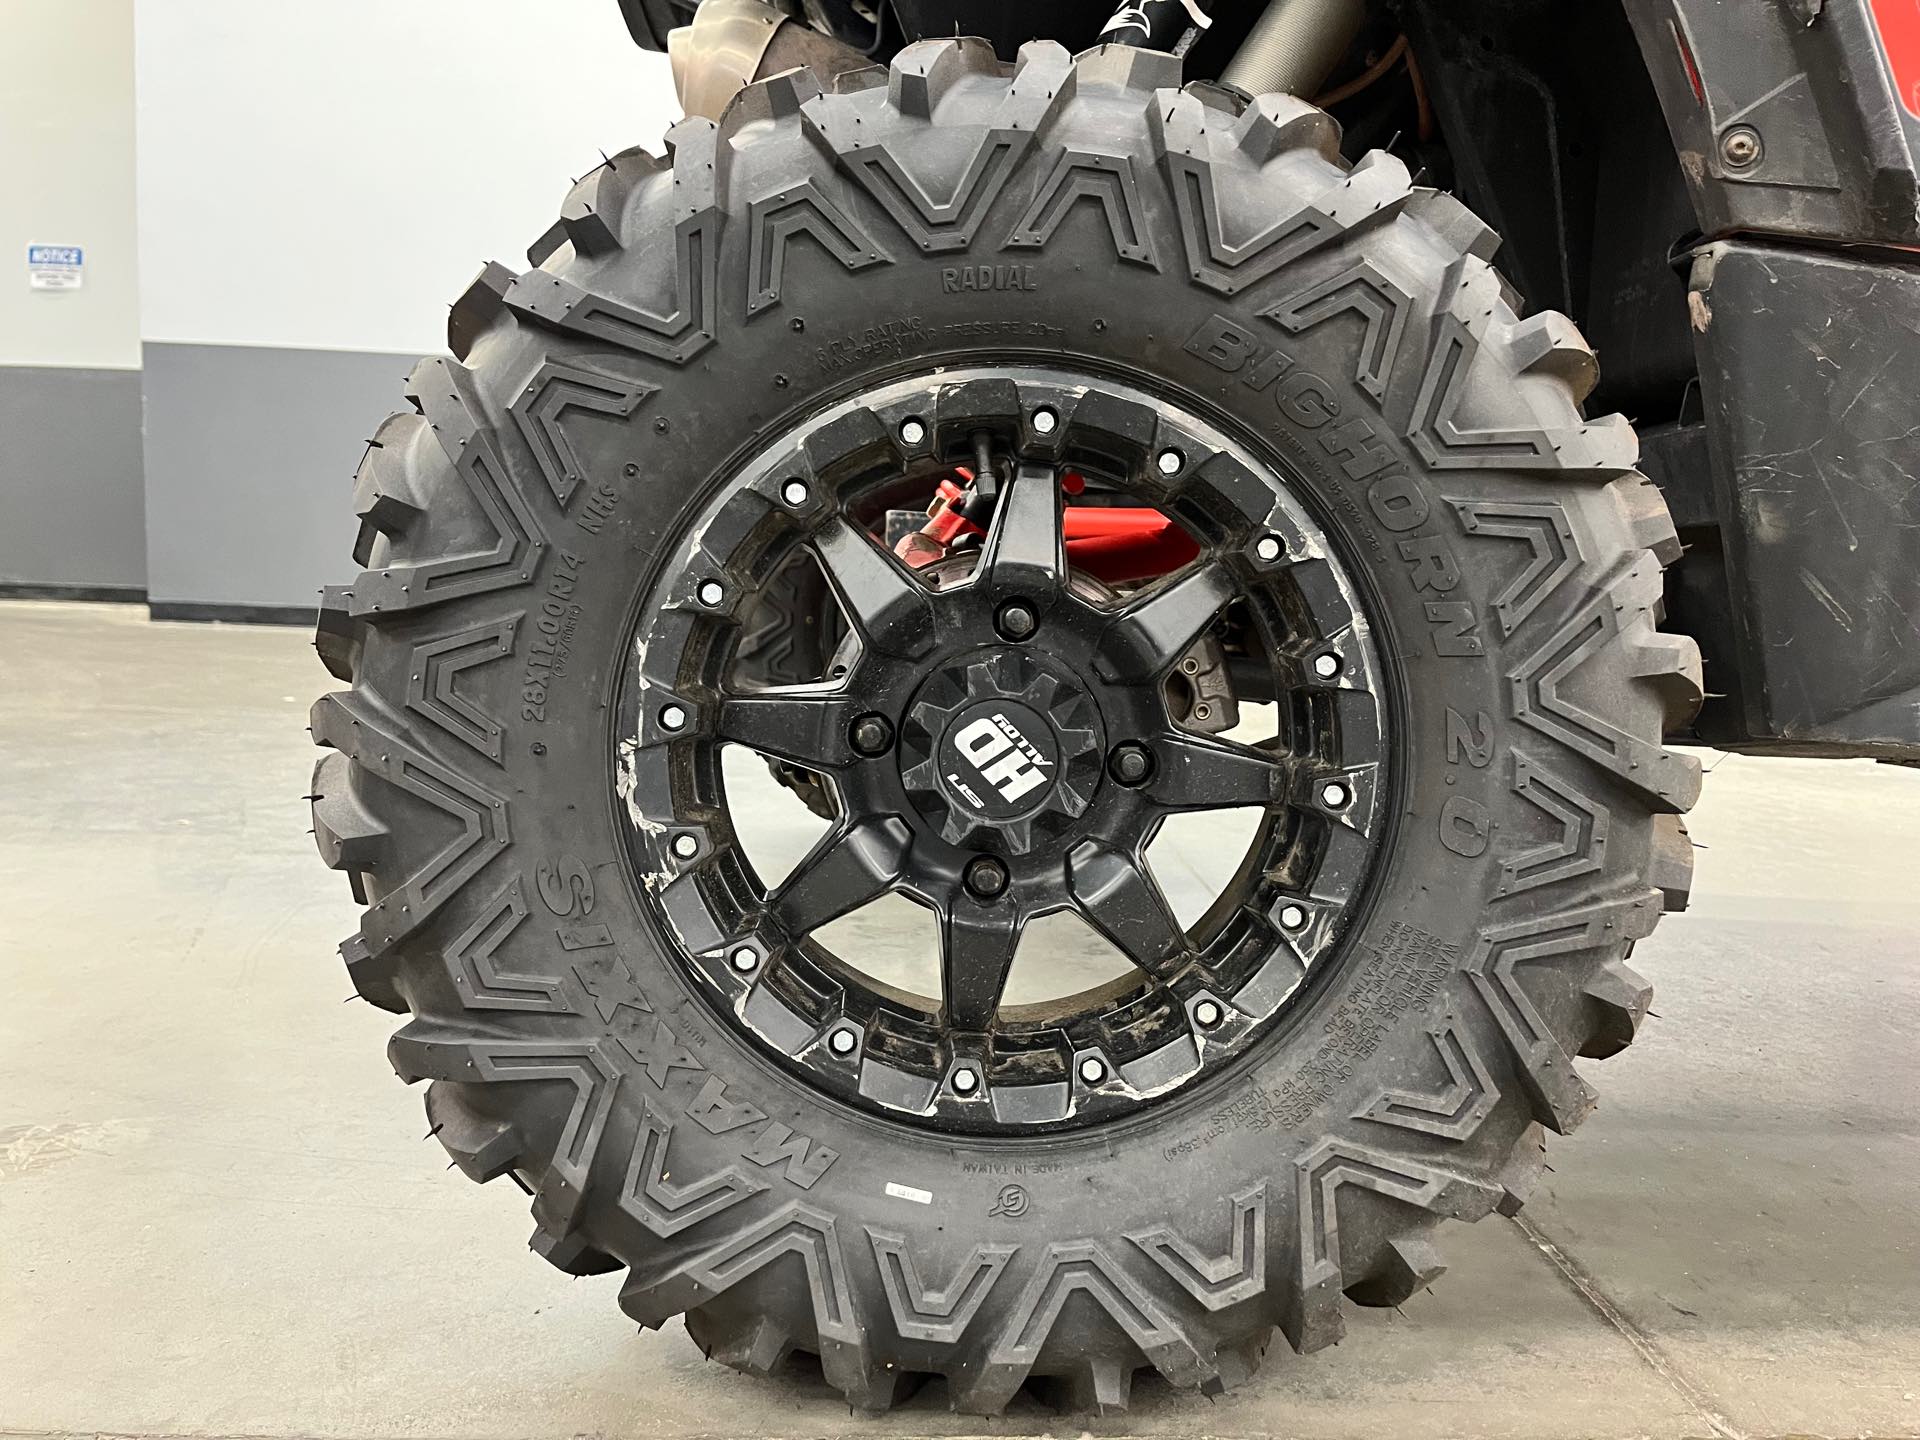 2014 CAN-AM 1000 X rs DPS at Aces Motorcycles - Denver